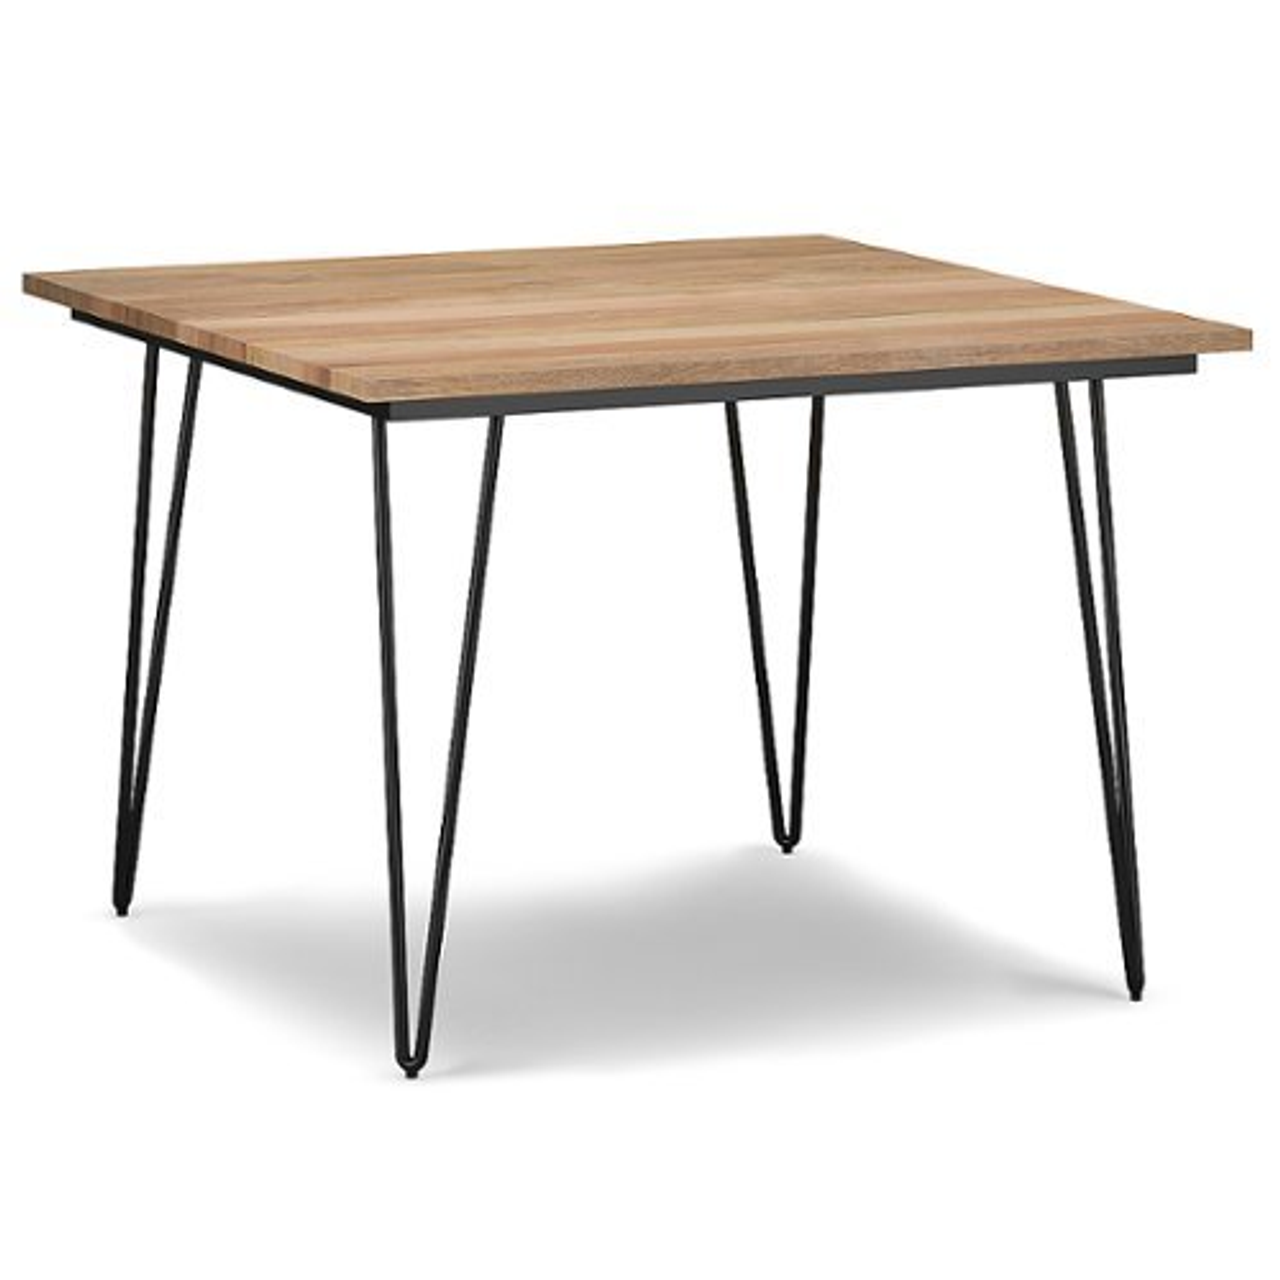 Simpli Home - Hunter 42 inch Square Dining Table - Natural